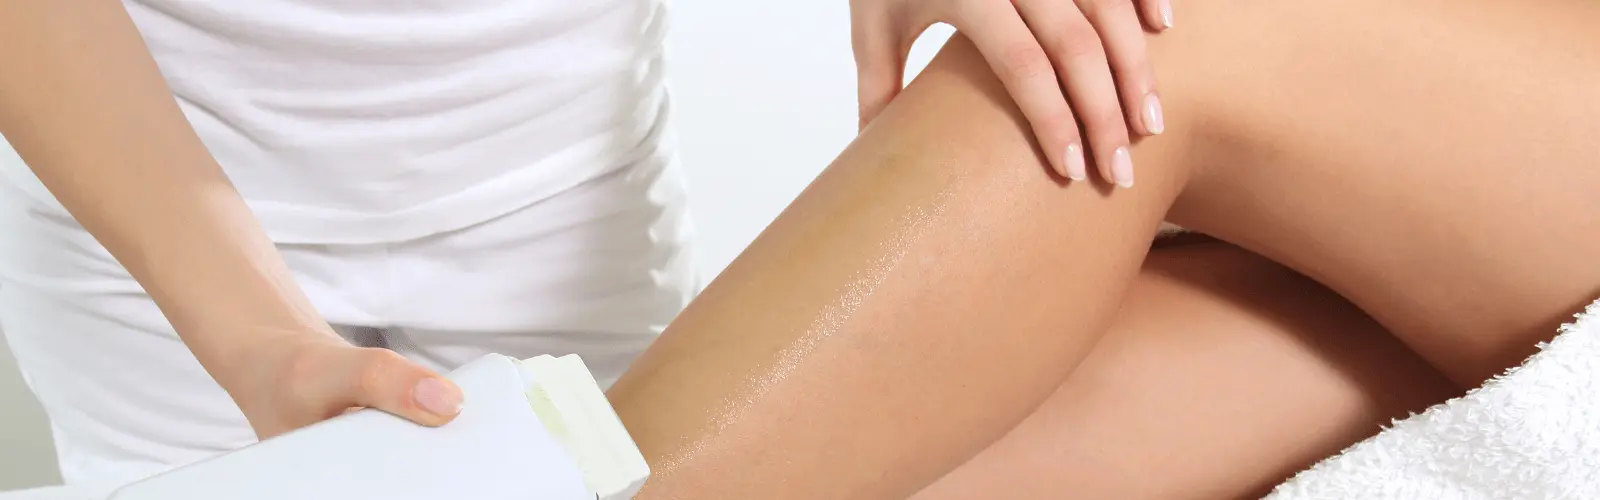 Laser Vs Waxing: Which Hair Removal Method Is Better?